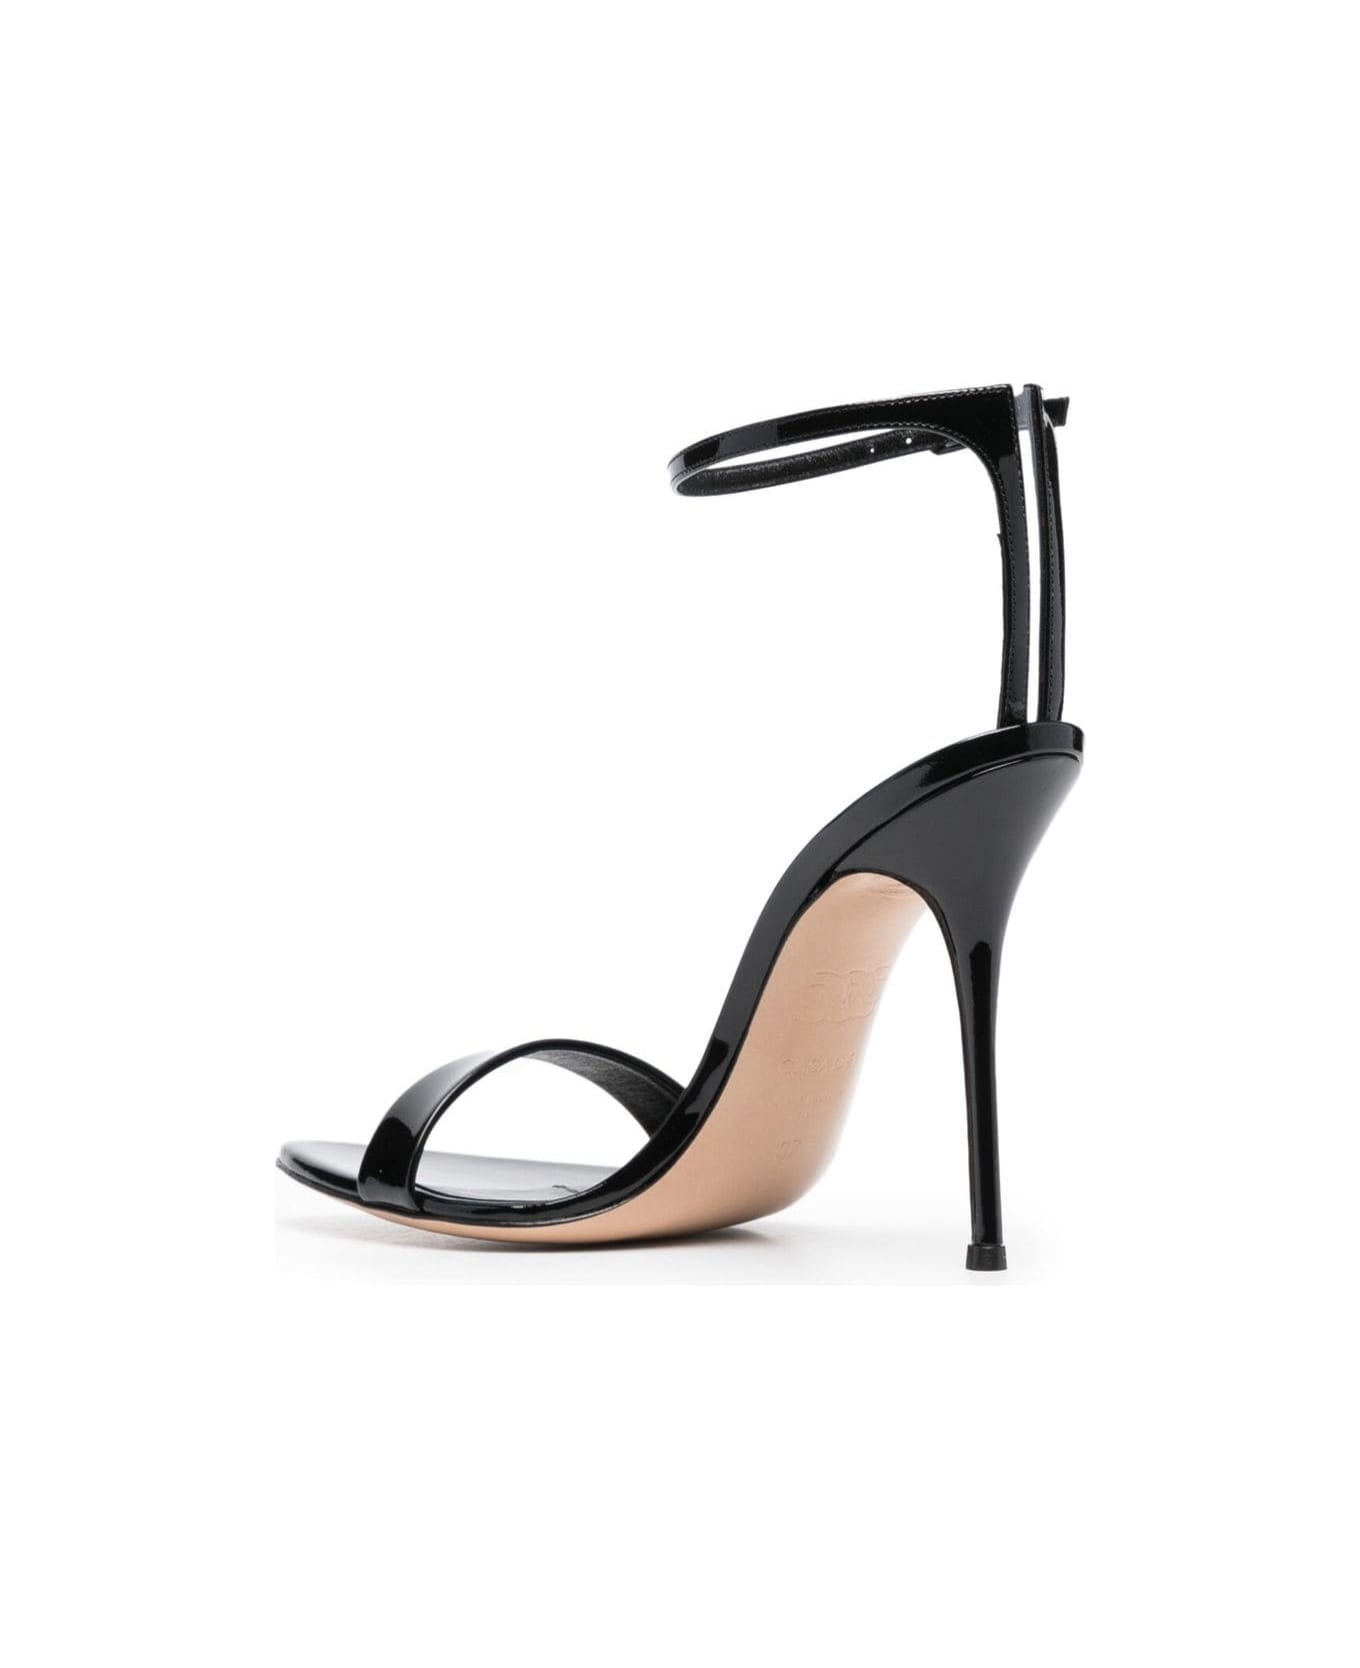 Casadei Black Patent Finish Sandals With Stiletto Heel In Leather Woman - Black